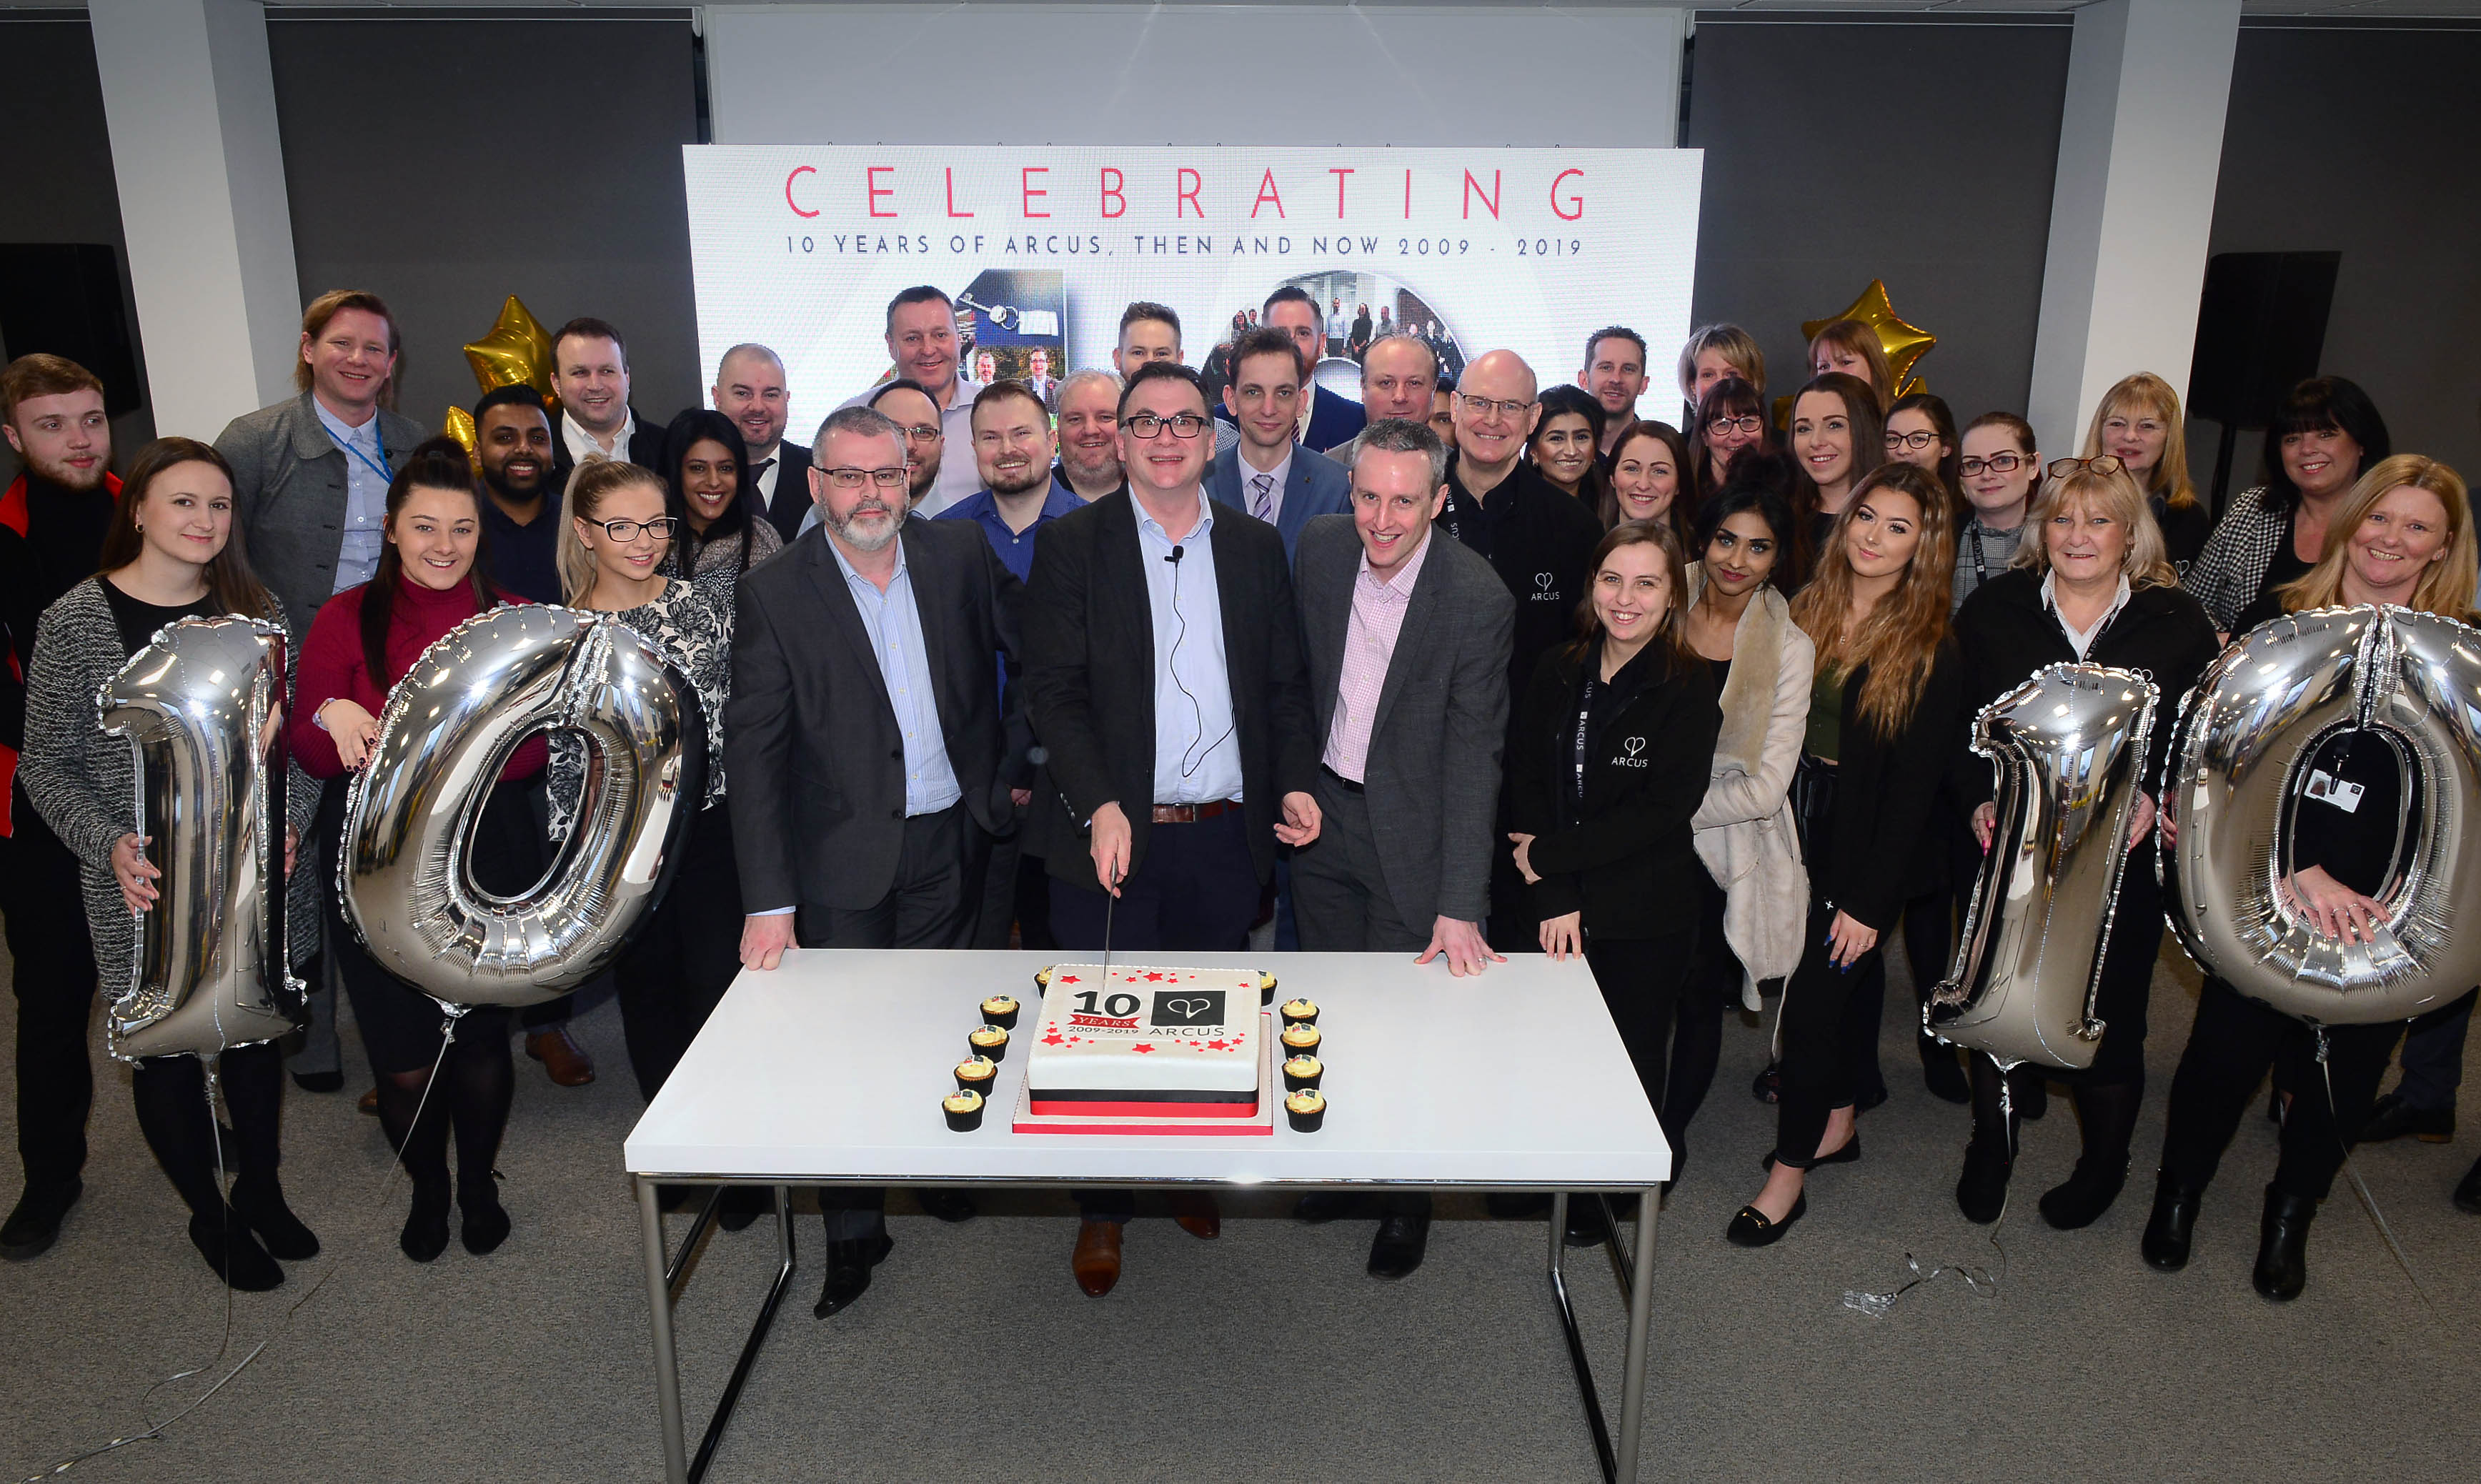 Arcus celebrates 10 years of delivering a winning service